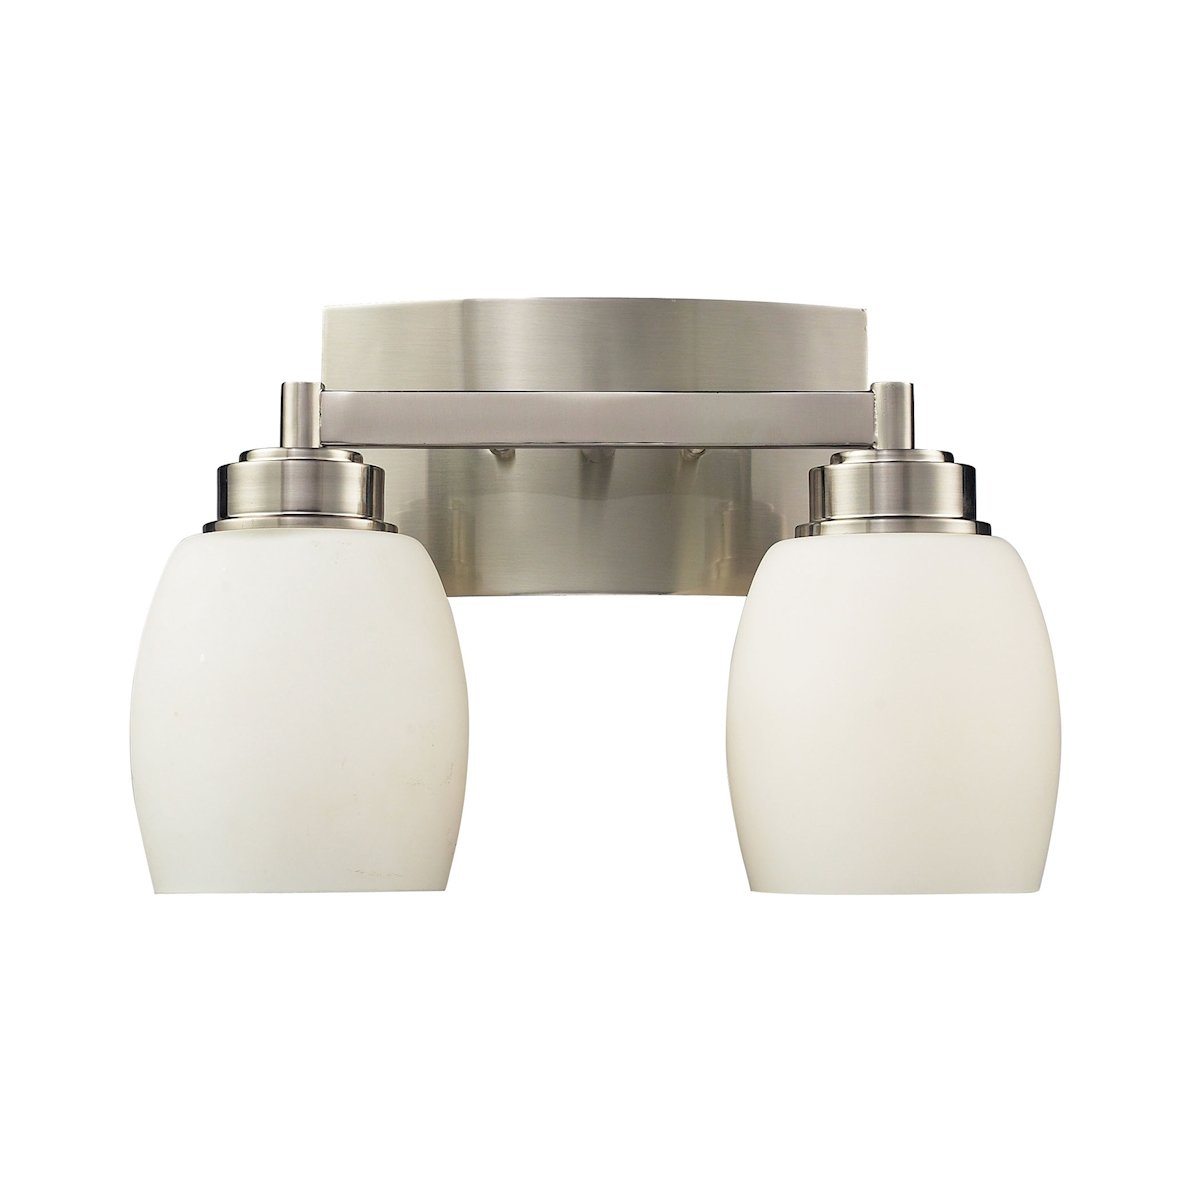 Northport 2 Light Vanity In Satin Nickel And Opal White Glass Wall Elk Lighting 